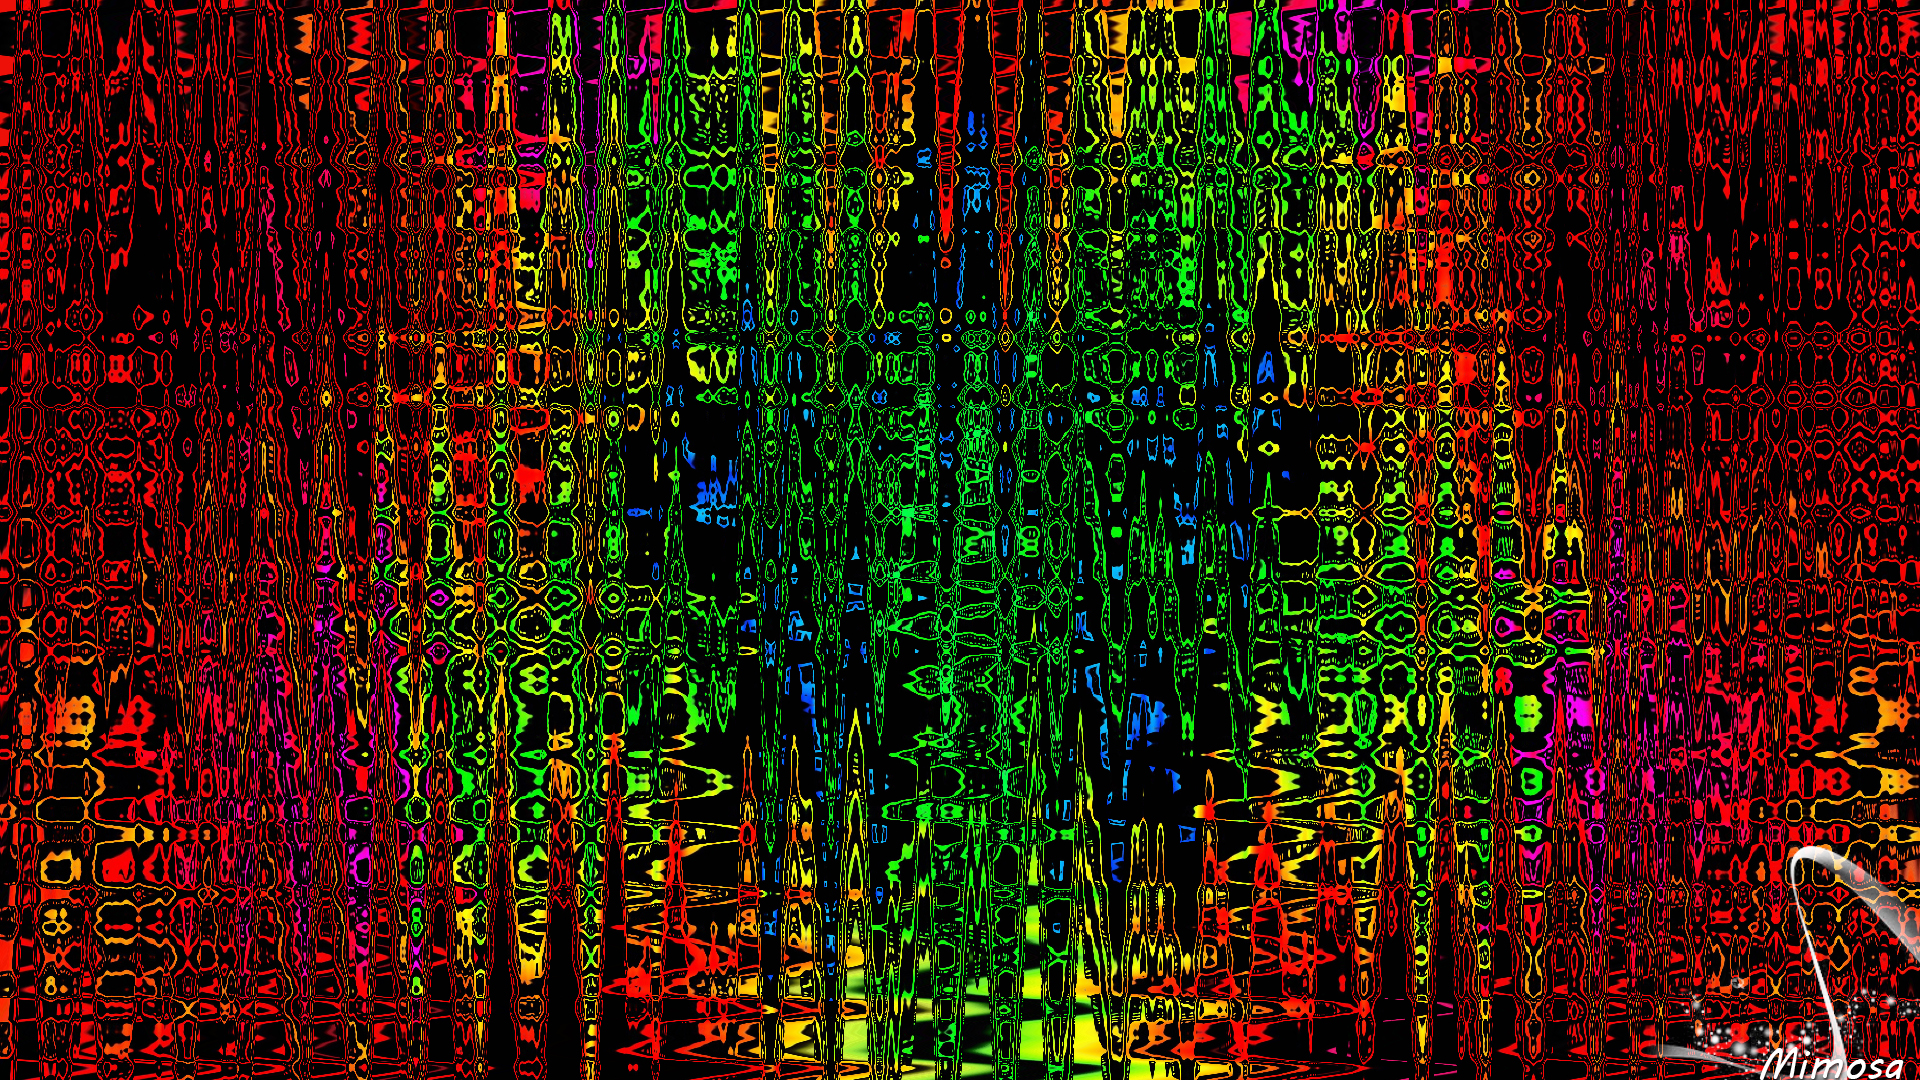 Abstract Artistic Colorful Colors Digital Art 1920x1080